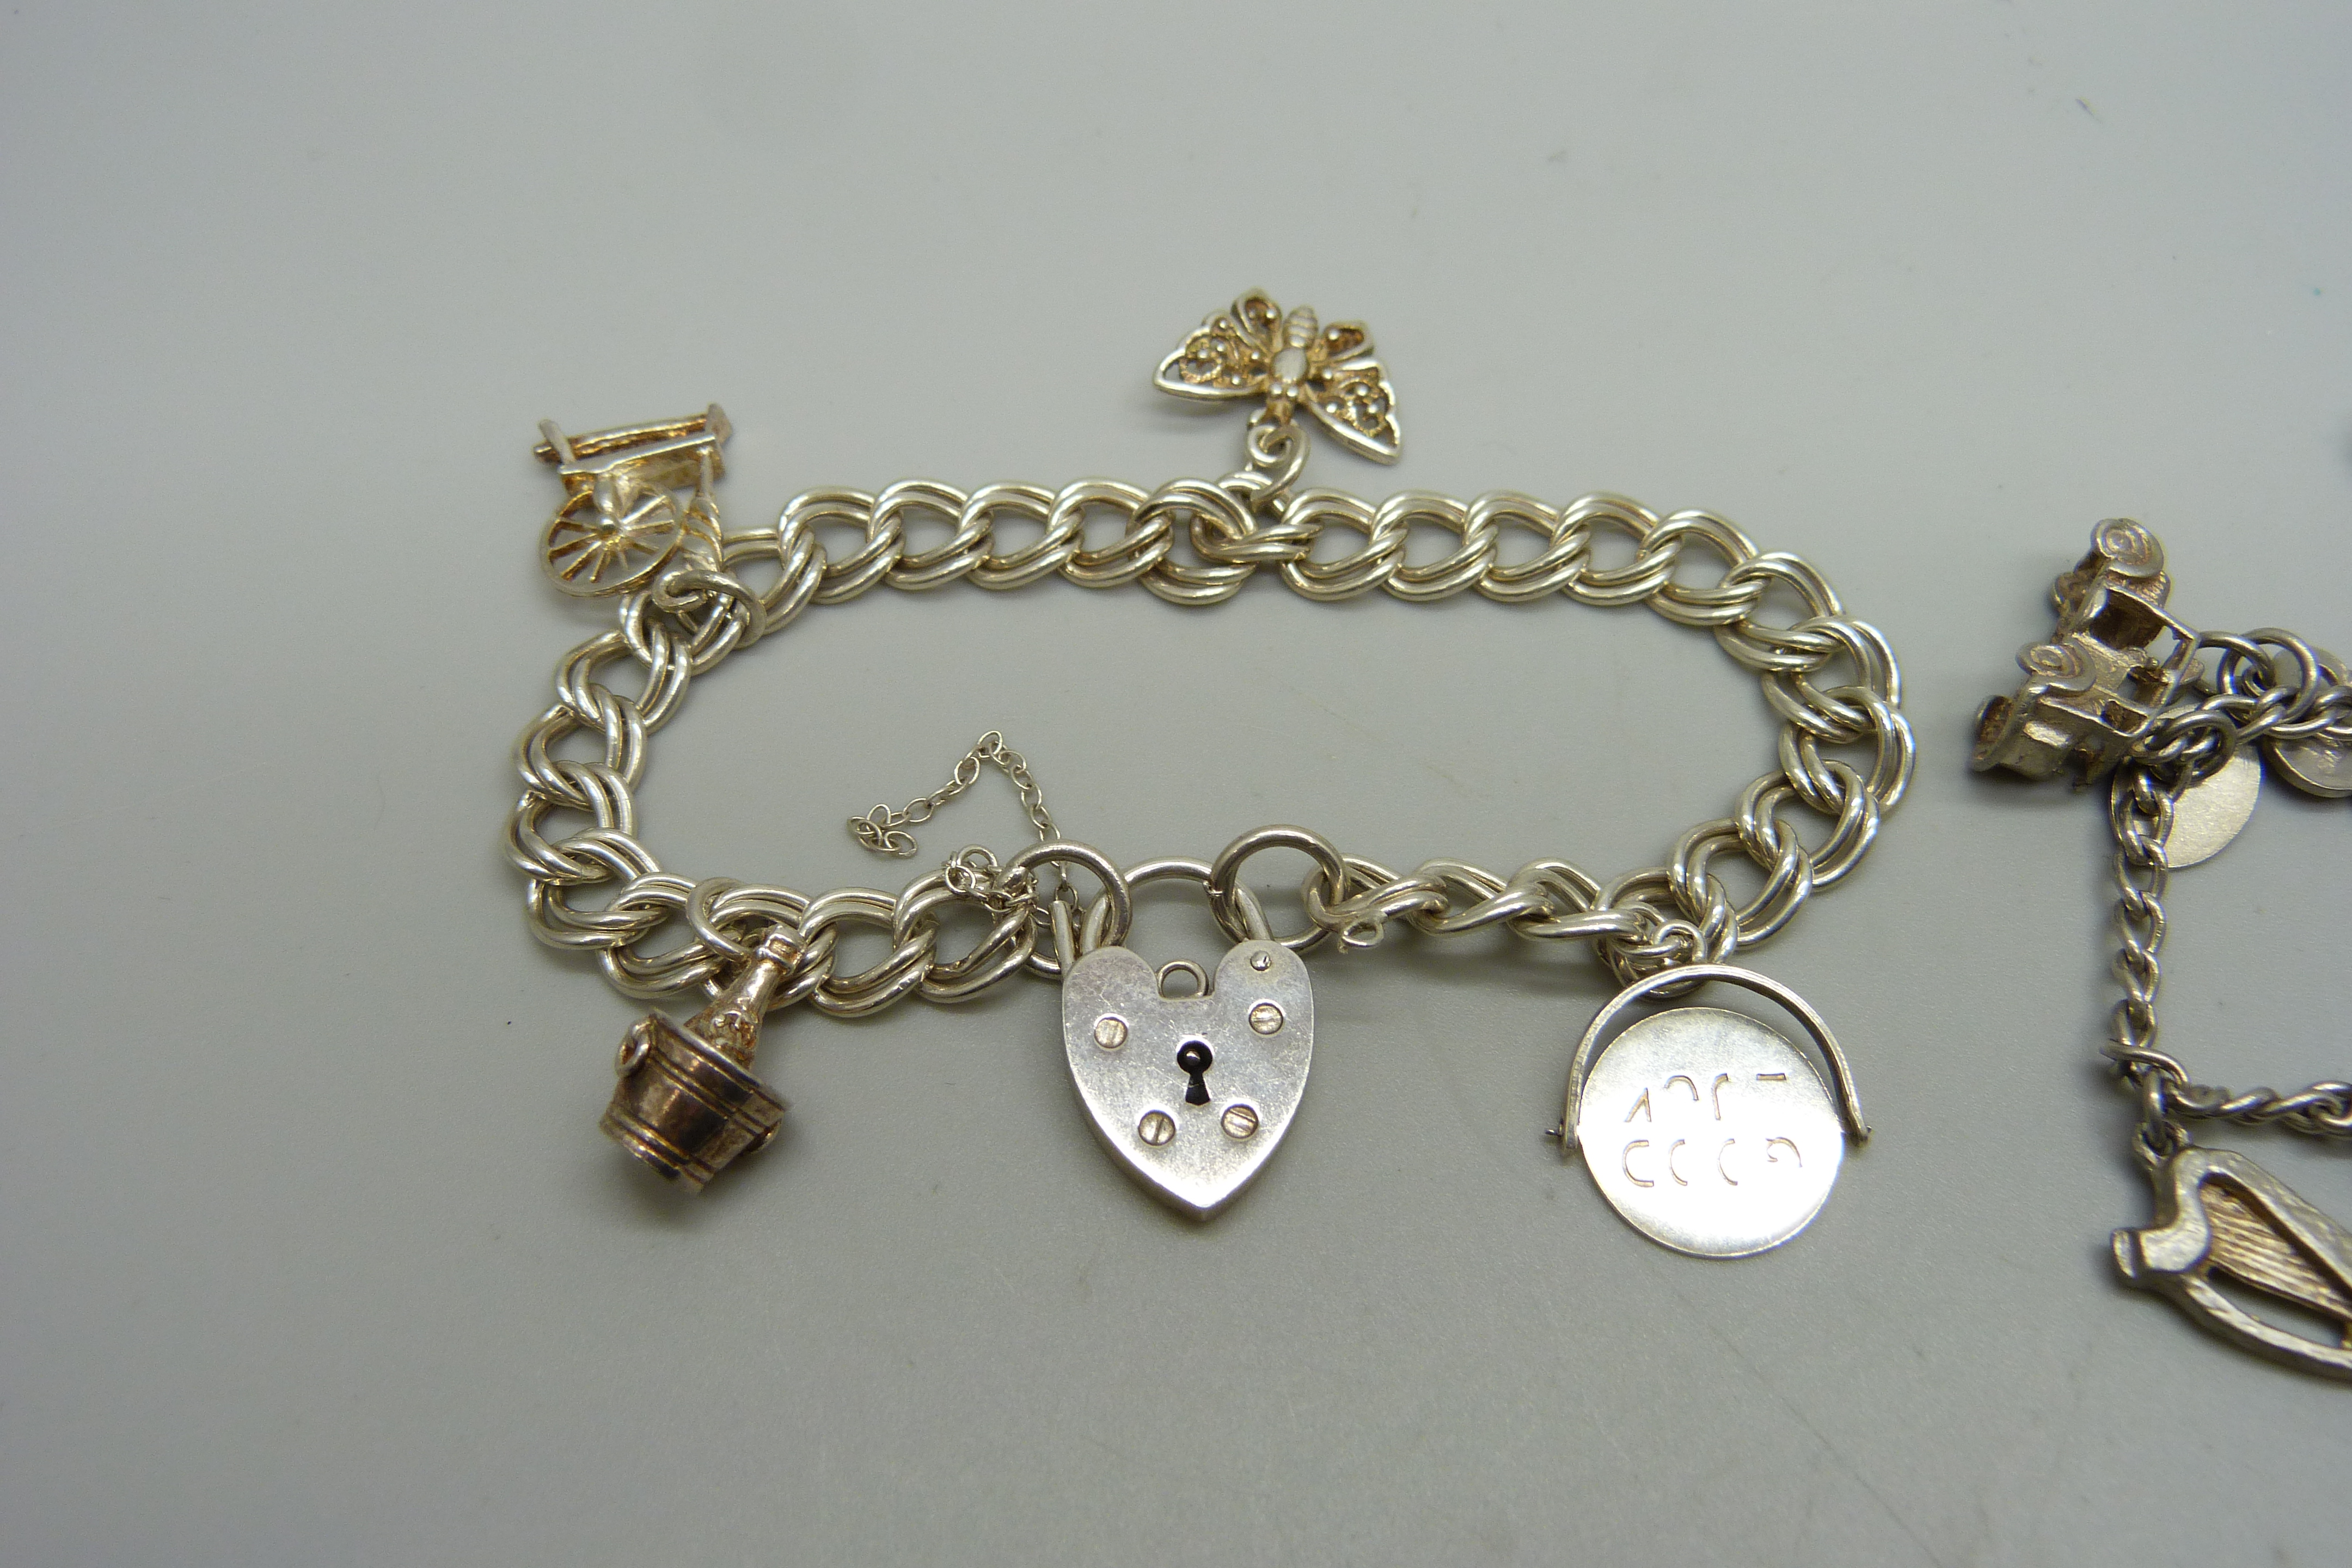 Two silver charm bracelets, 43g - Image 2 of 3